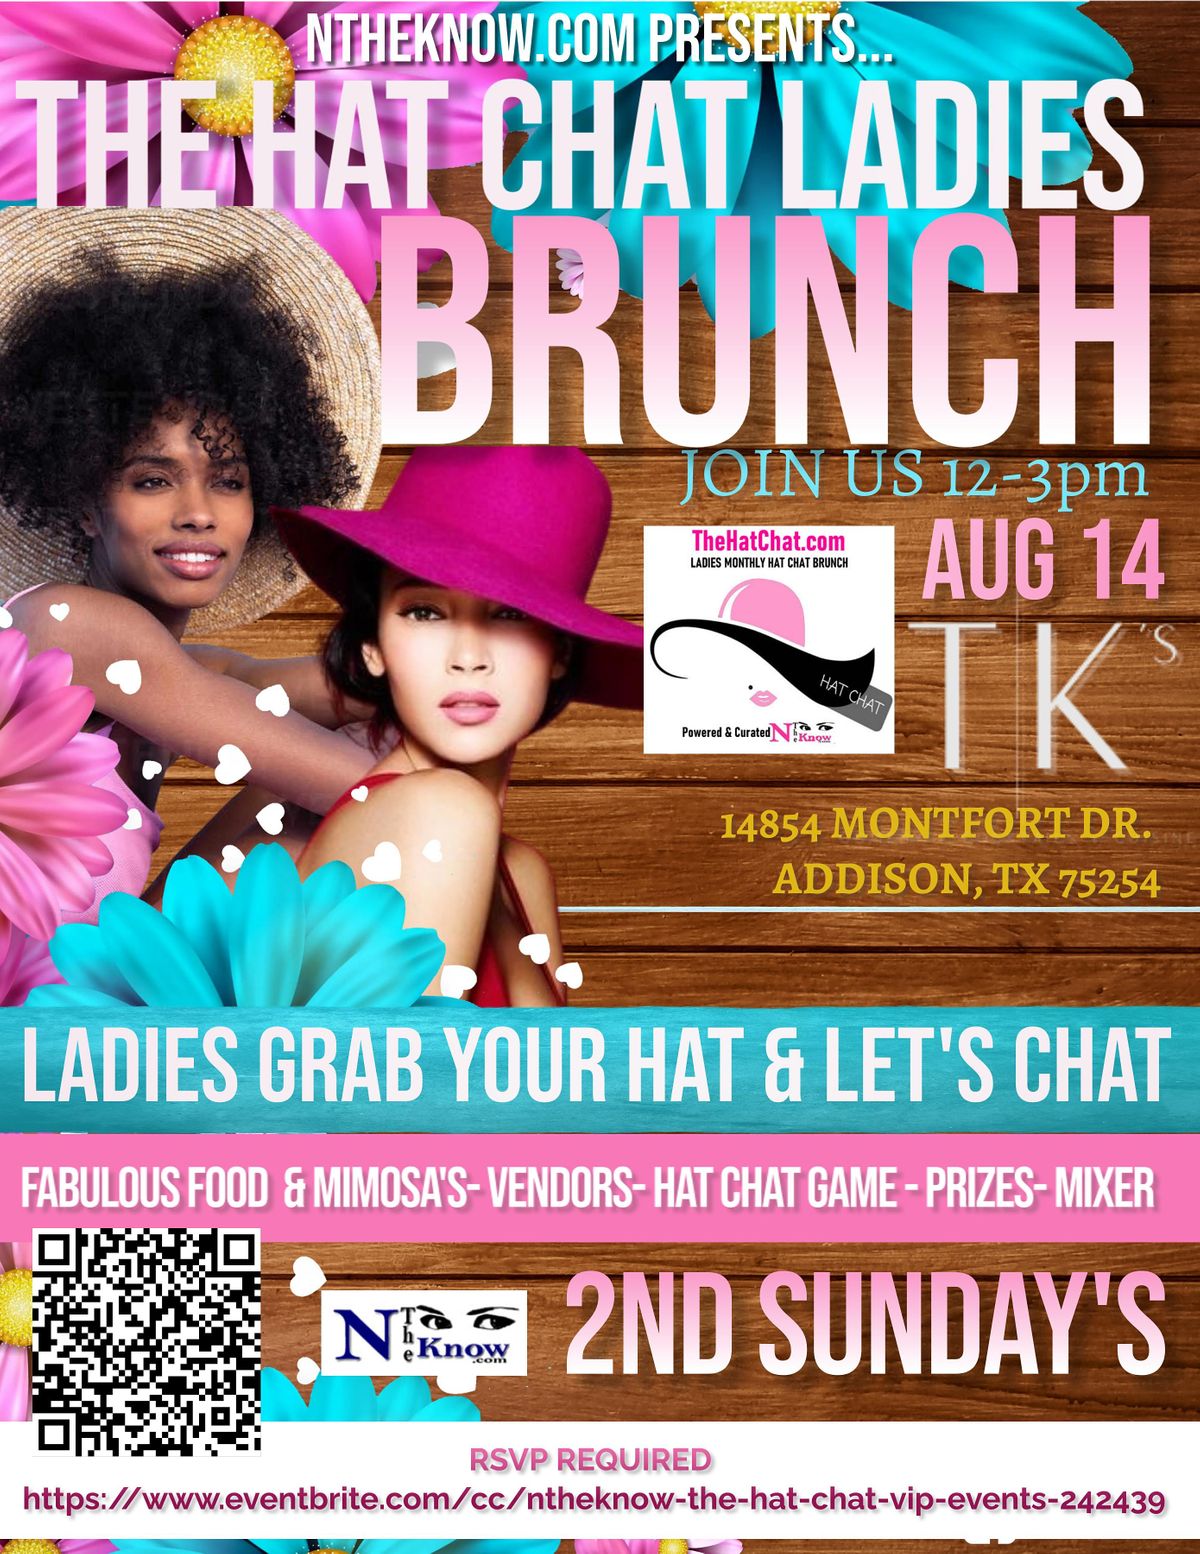 NTheknow Presents The Hat Chat Ladies Brunch Aug 14 @ TK's in Addison